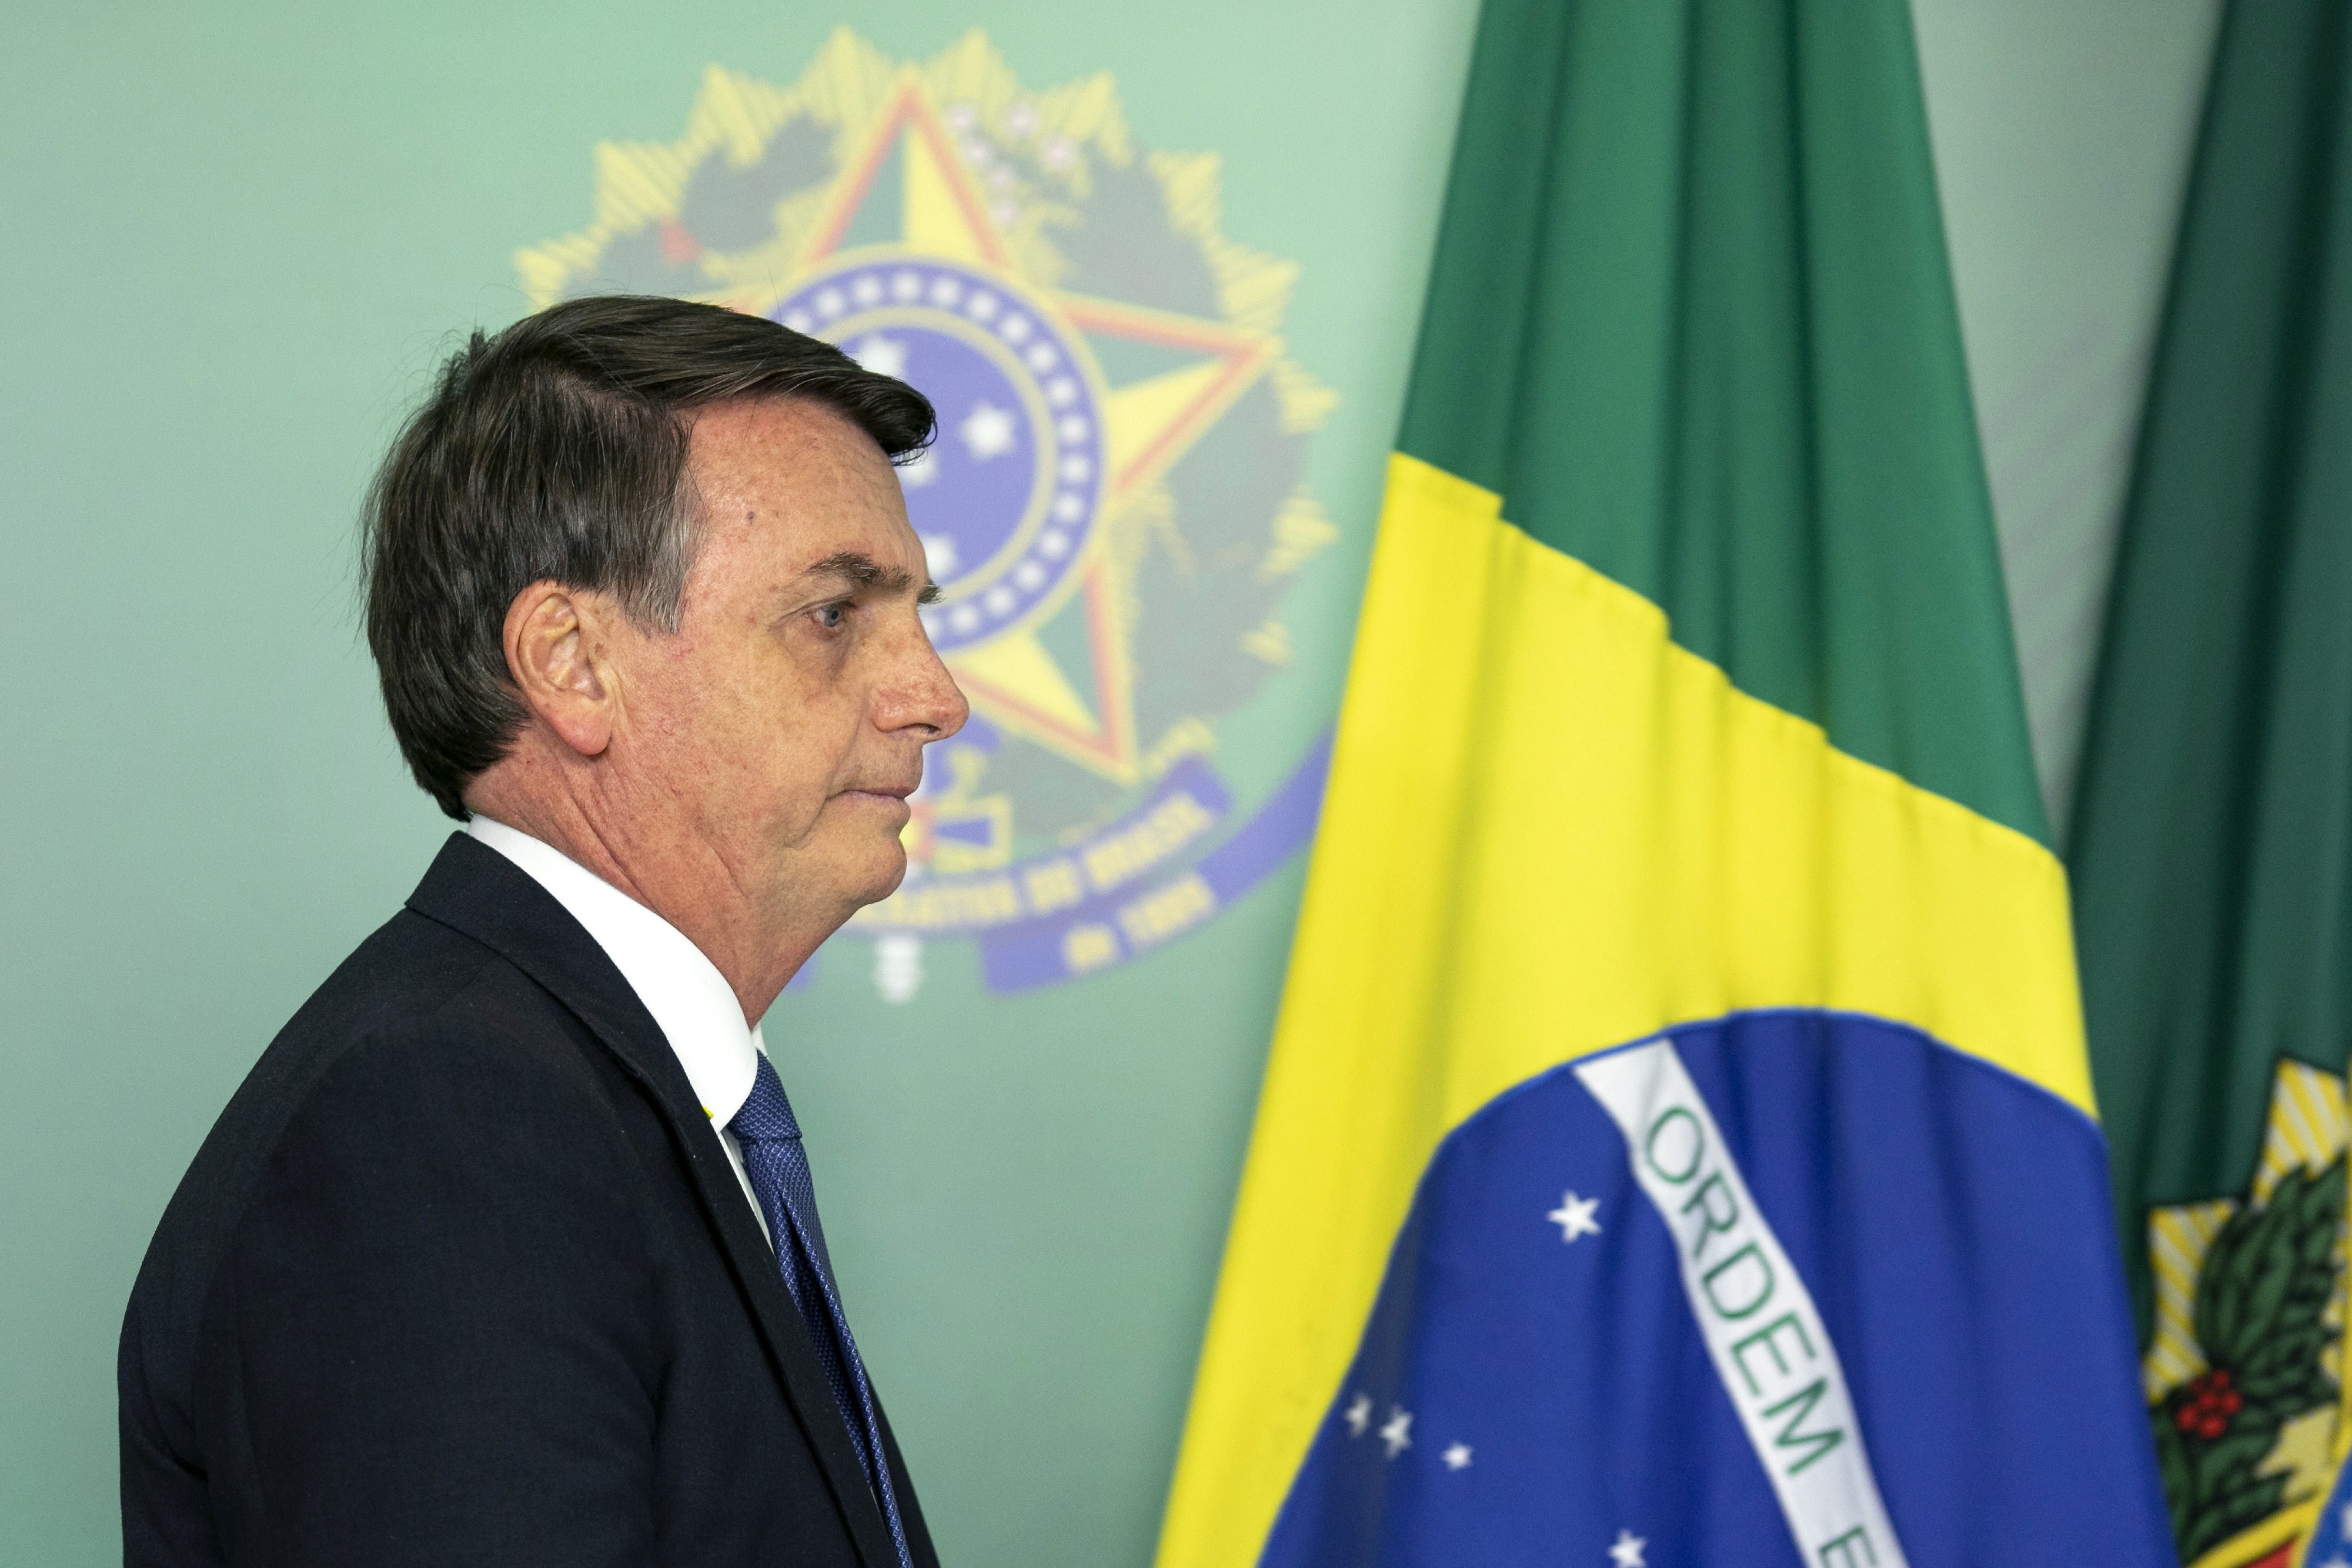 Brazilian President Jair Bolsonaro arrives to give a statement in Brasilia on January 25, 2019 on the collapse of a dam near Brumadinho in southeastern Brazil. - A dam collapse in southeastern Brazil unleashed a torrent of mud on a riverside town and surrounding farmland Friday, destroying houses, leaving 200 people missing and raising fears of a number of deaths, according to officials. The dam belonged to Brazilian mining giant Vale. (Photo by Sergio LIMA / AFP) (Photo credit should read SERGIO LIMA/AFP/Getty Images)